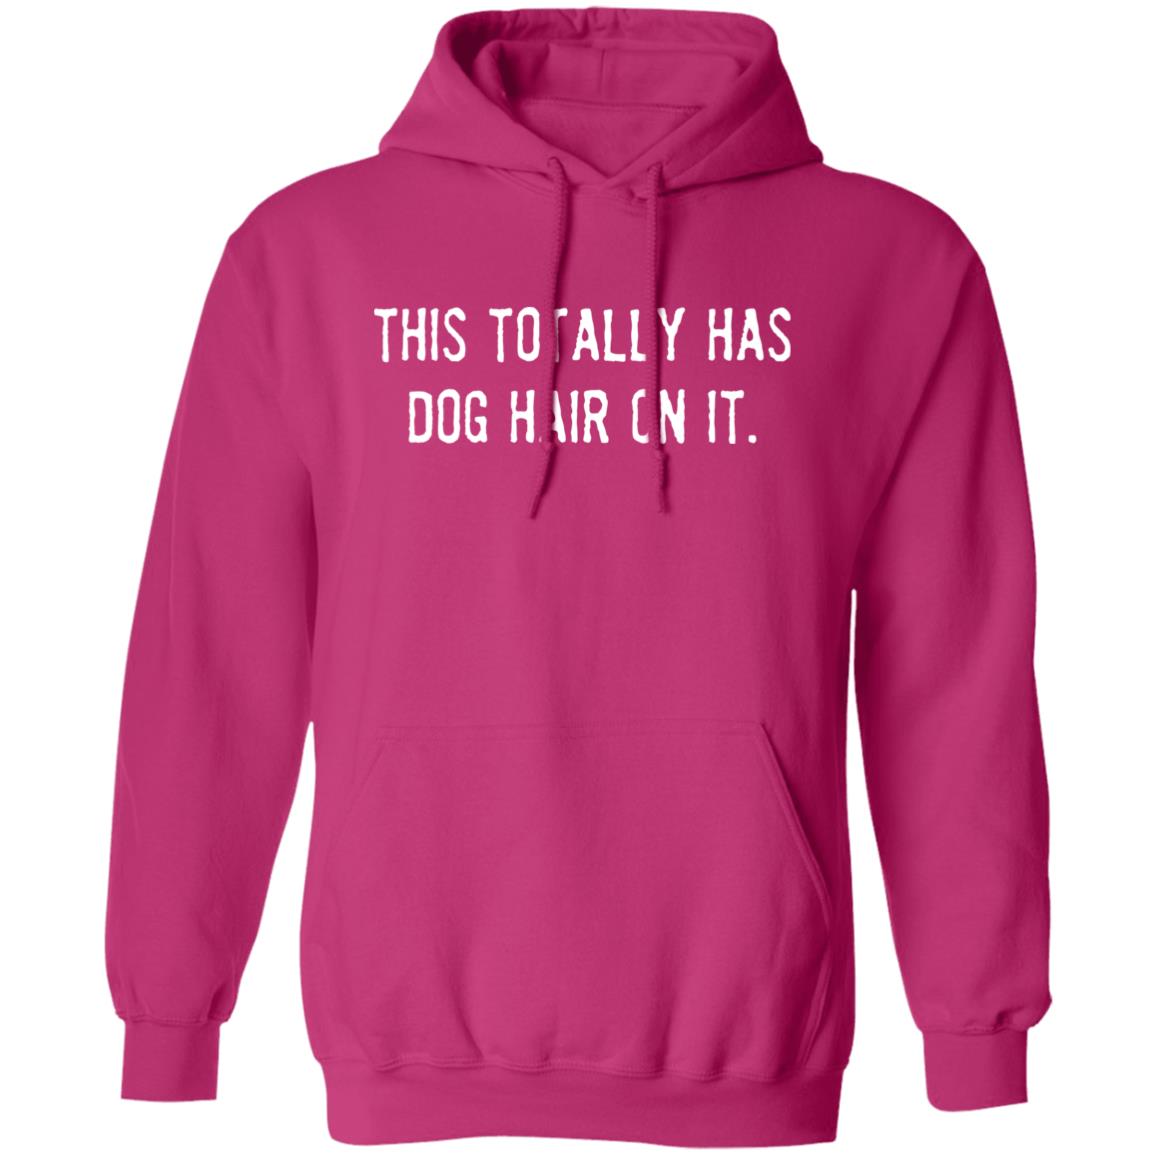 This Totally Has Dog Hair On It Hoodie Heather Hot Pink